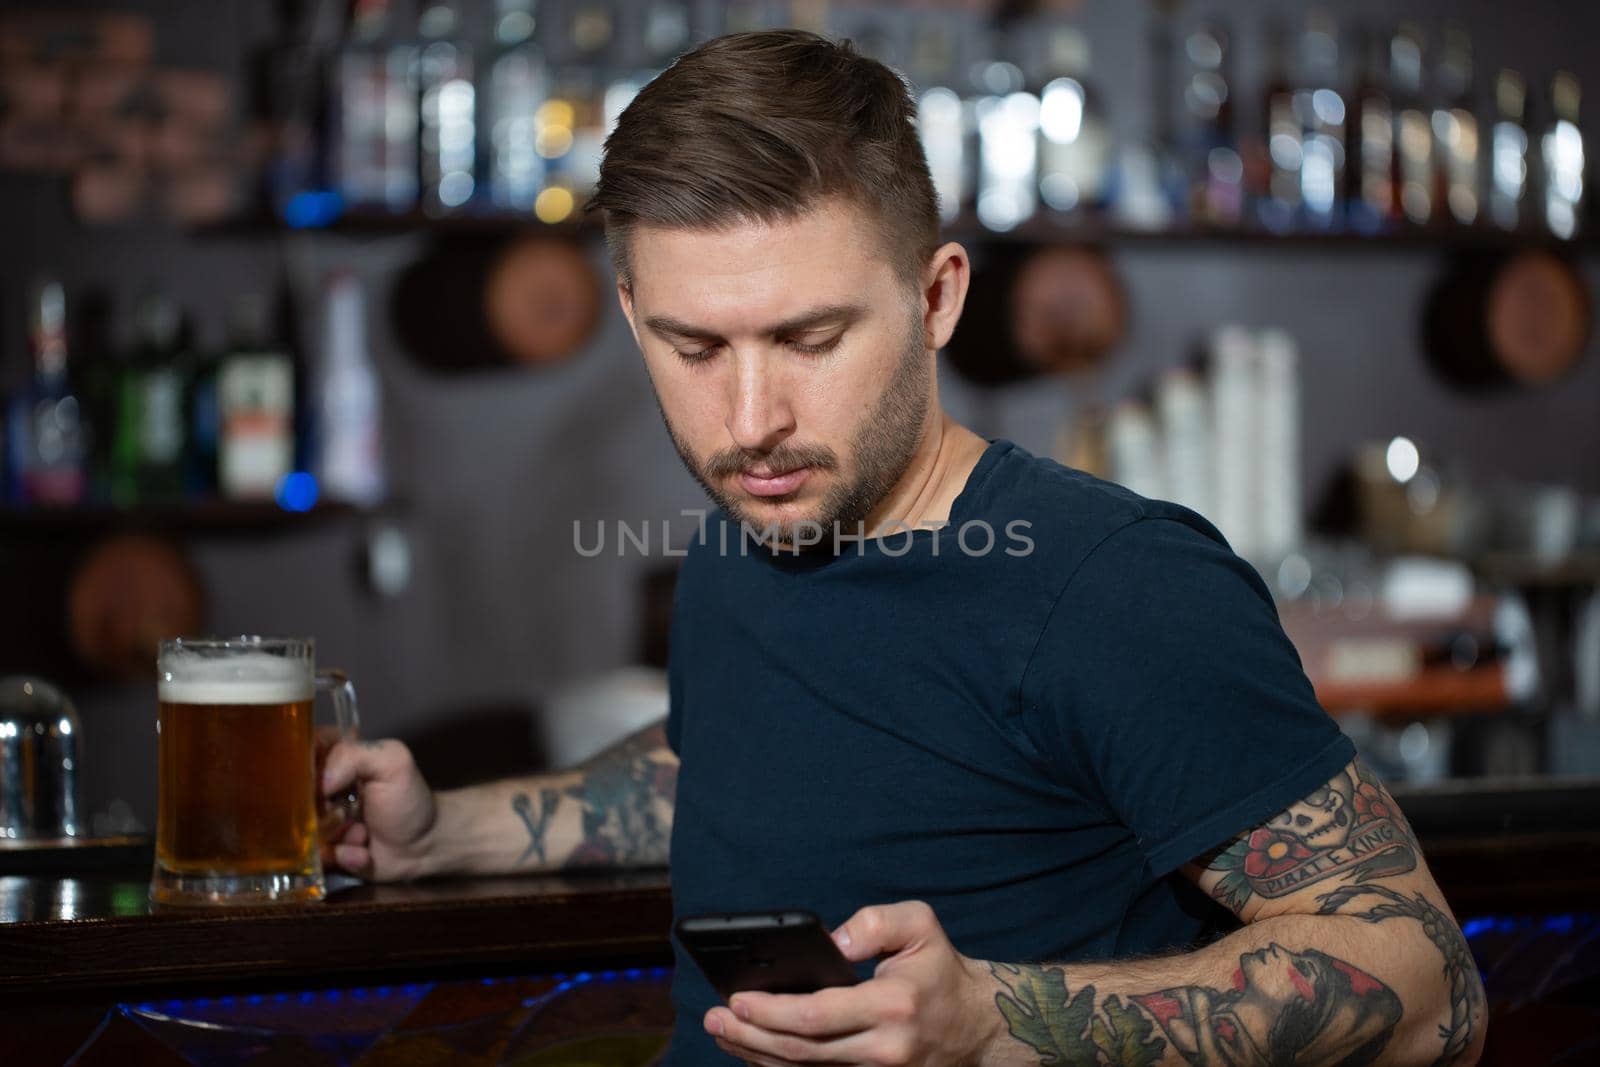 Young man sitting at bar counter with a pint of light beer